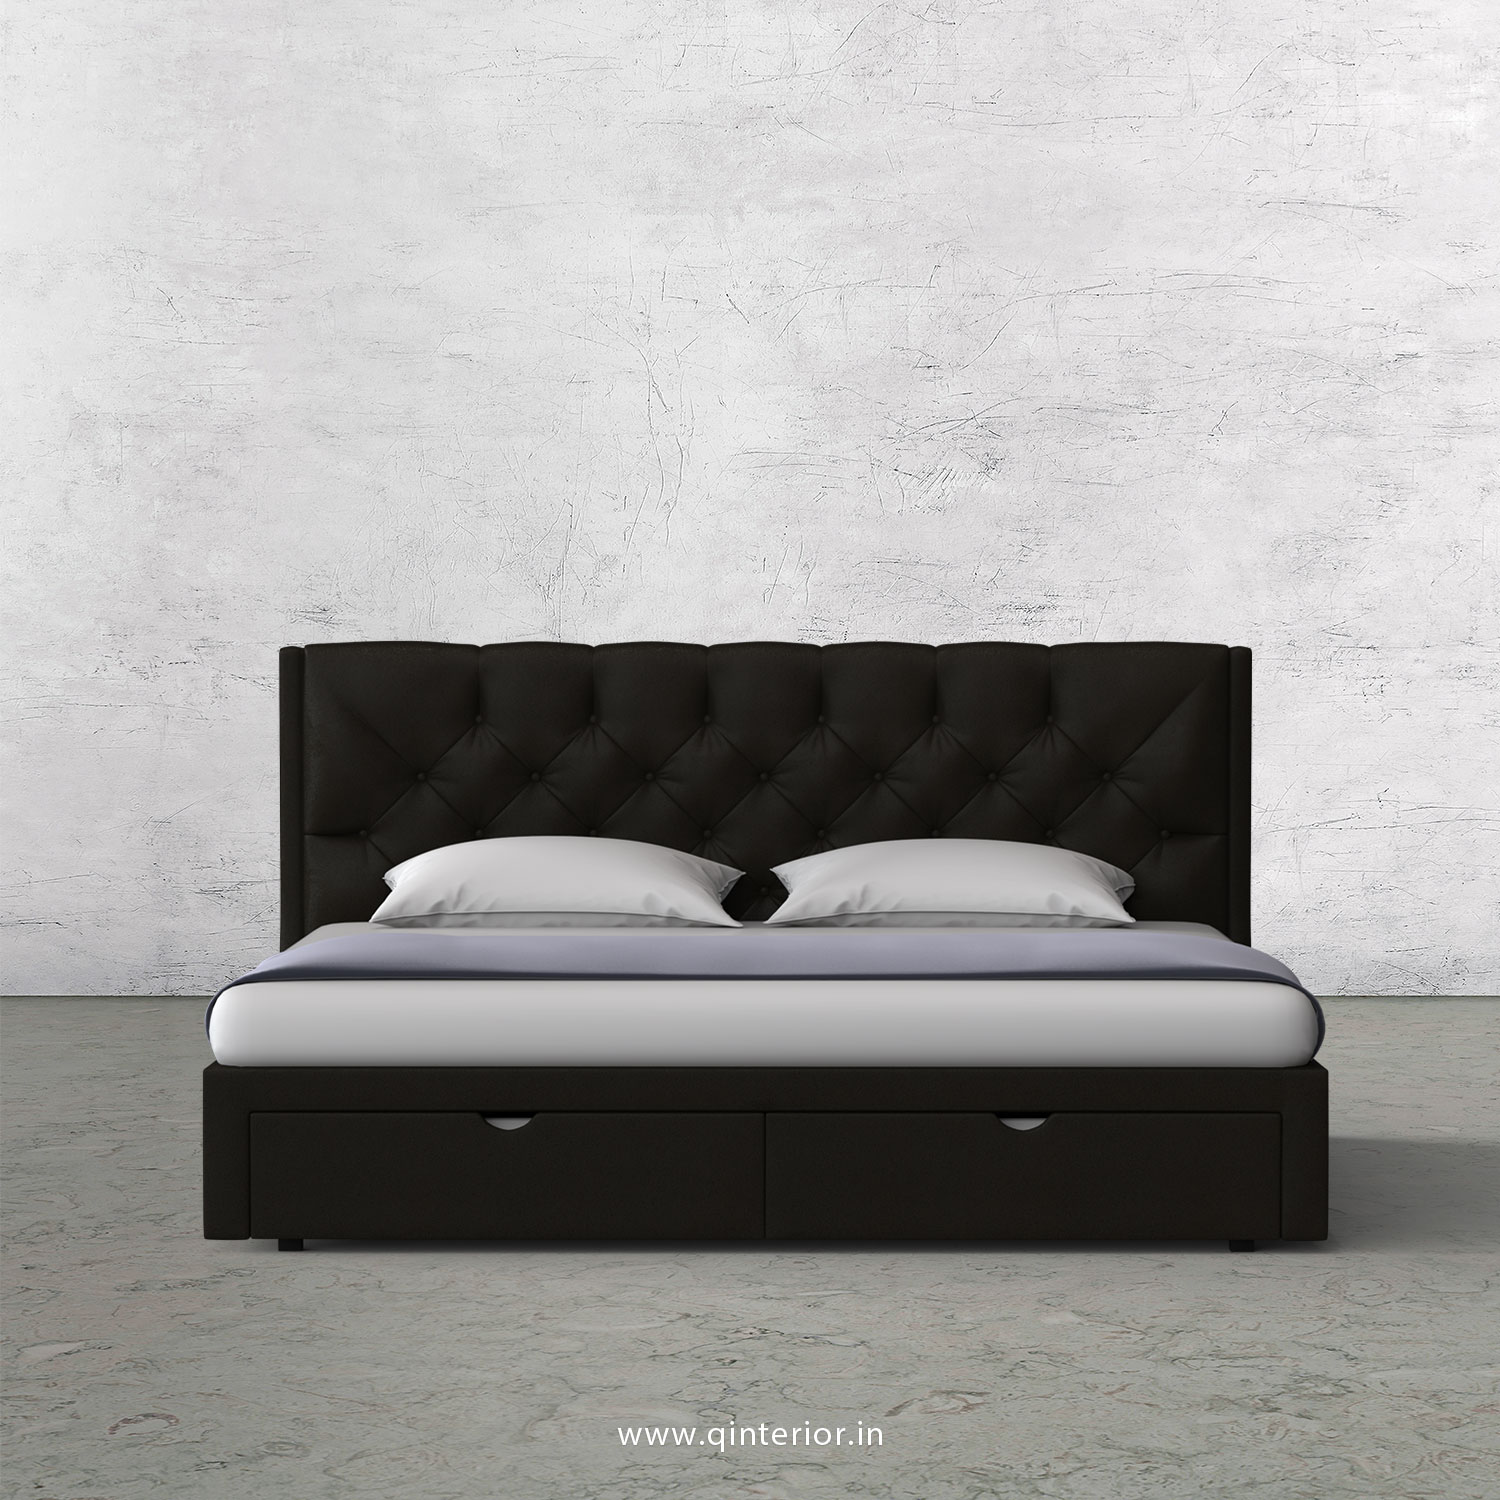 Scorpius Queen Storage Bed in Fab Leather Fabric - QBD001 FL11